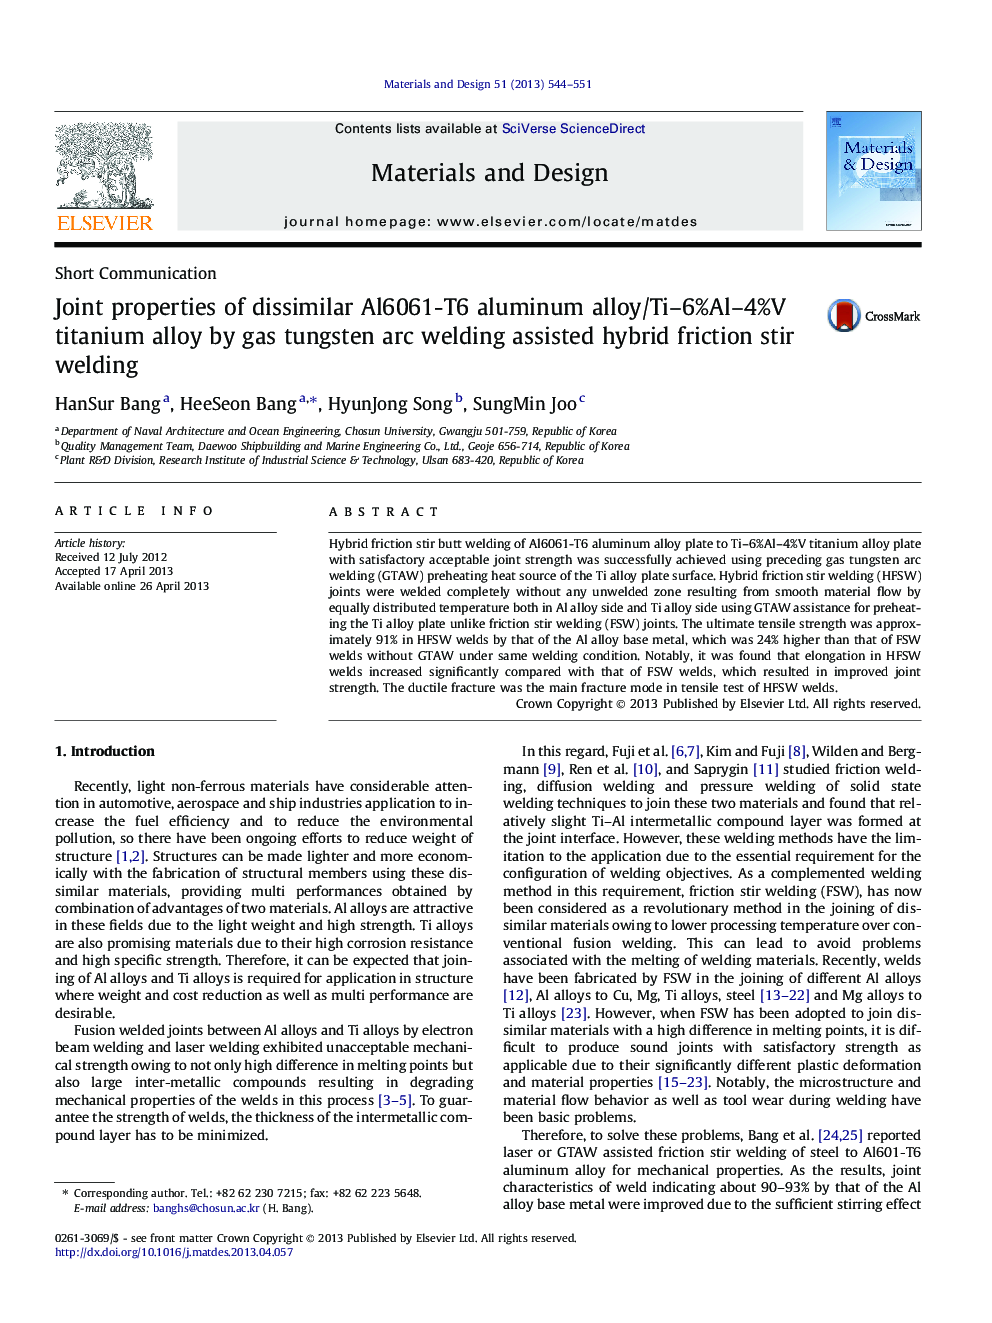 Joint properties of dissimilar Al6061-T6 aluminum alloy/Ti–6%Al–4%V titanium alloy by gas tungsten arc welding assisted hybrid friction stir welding